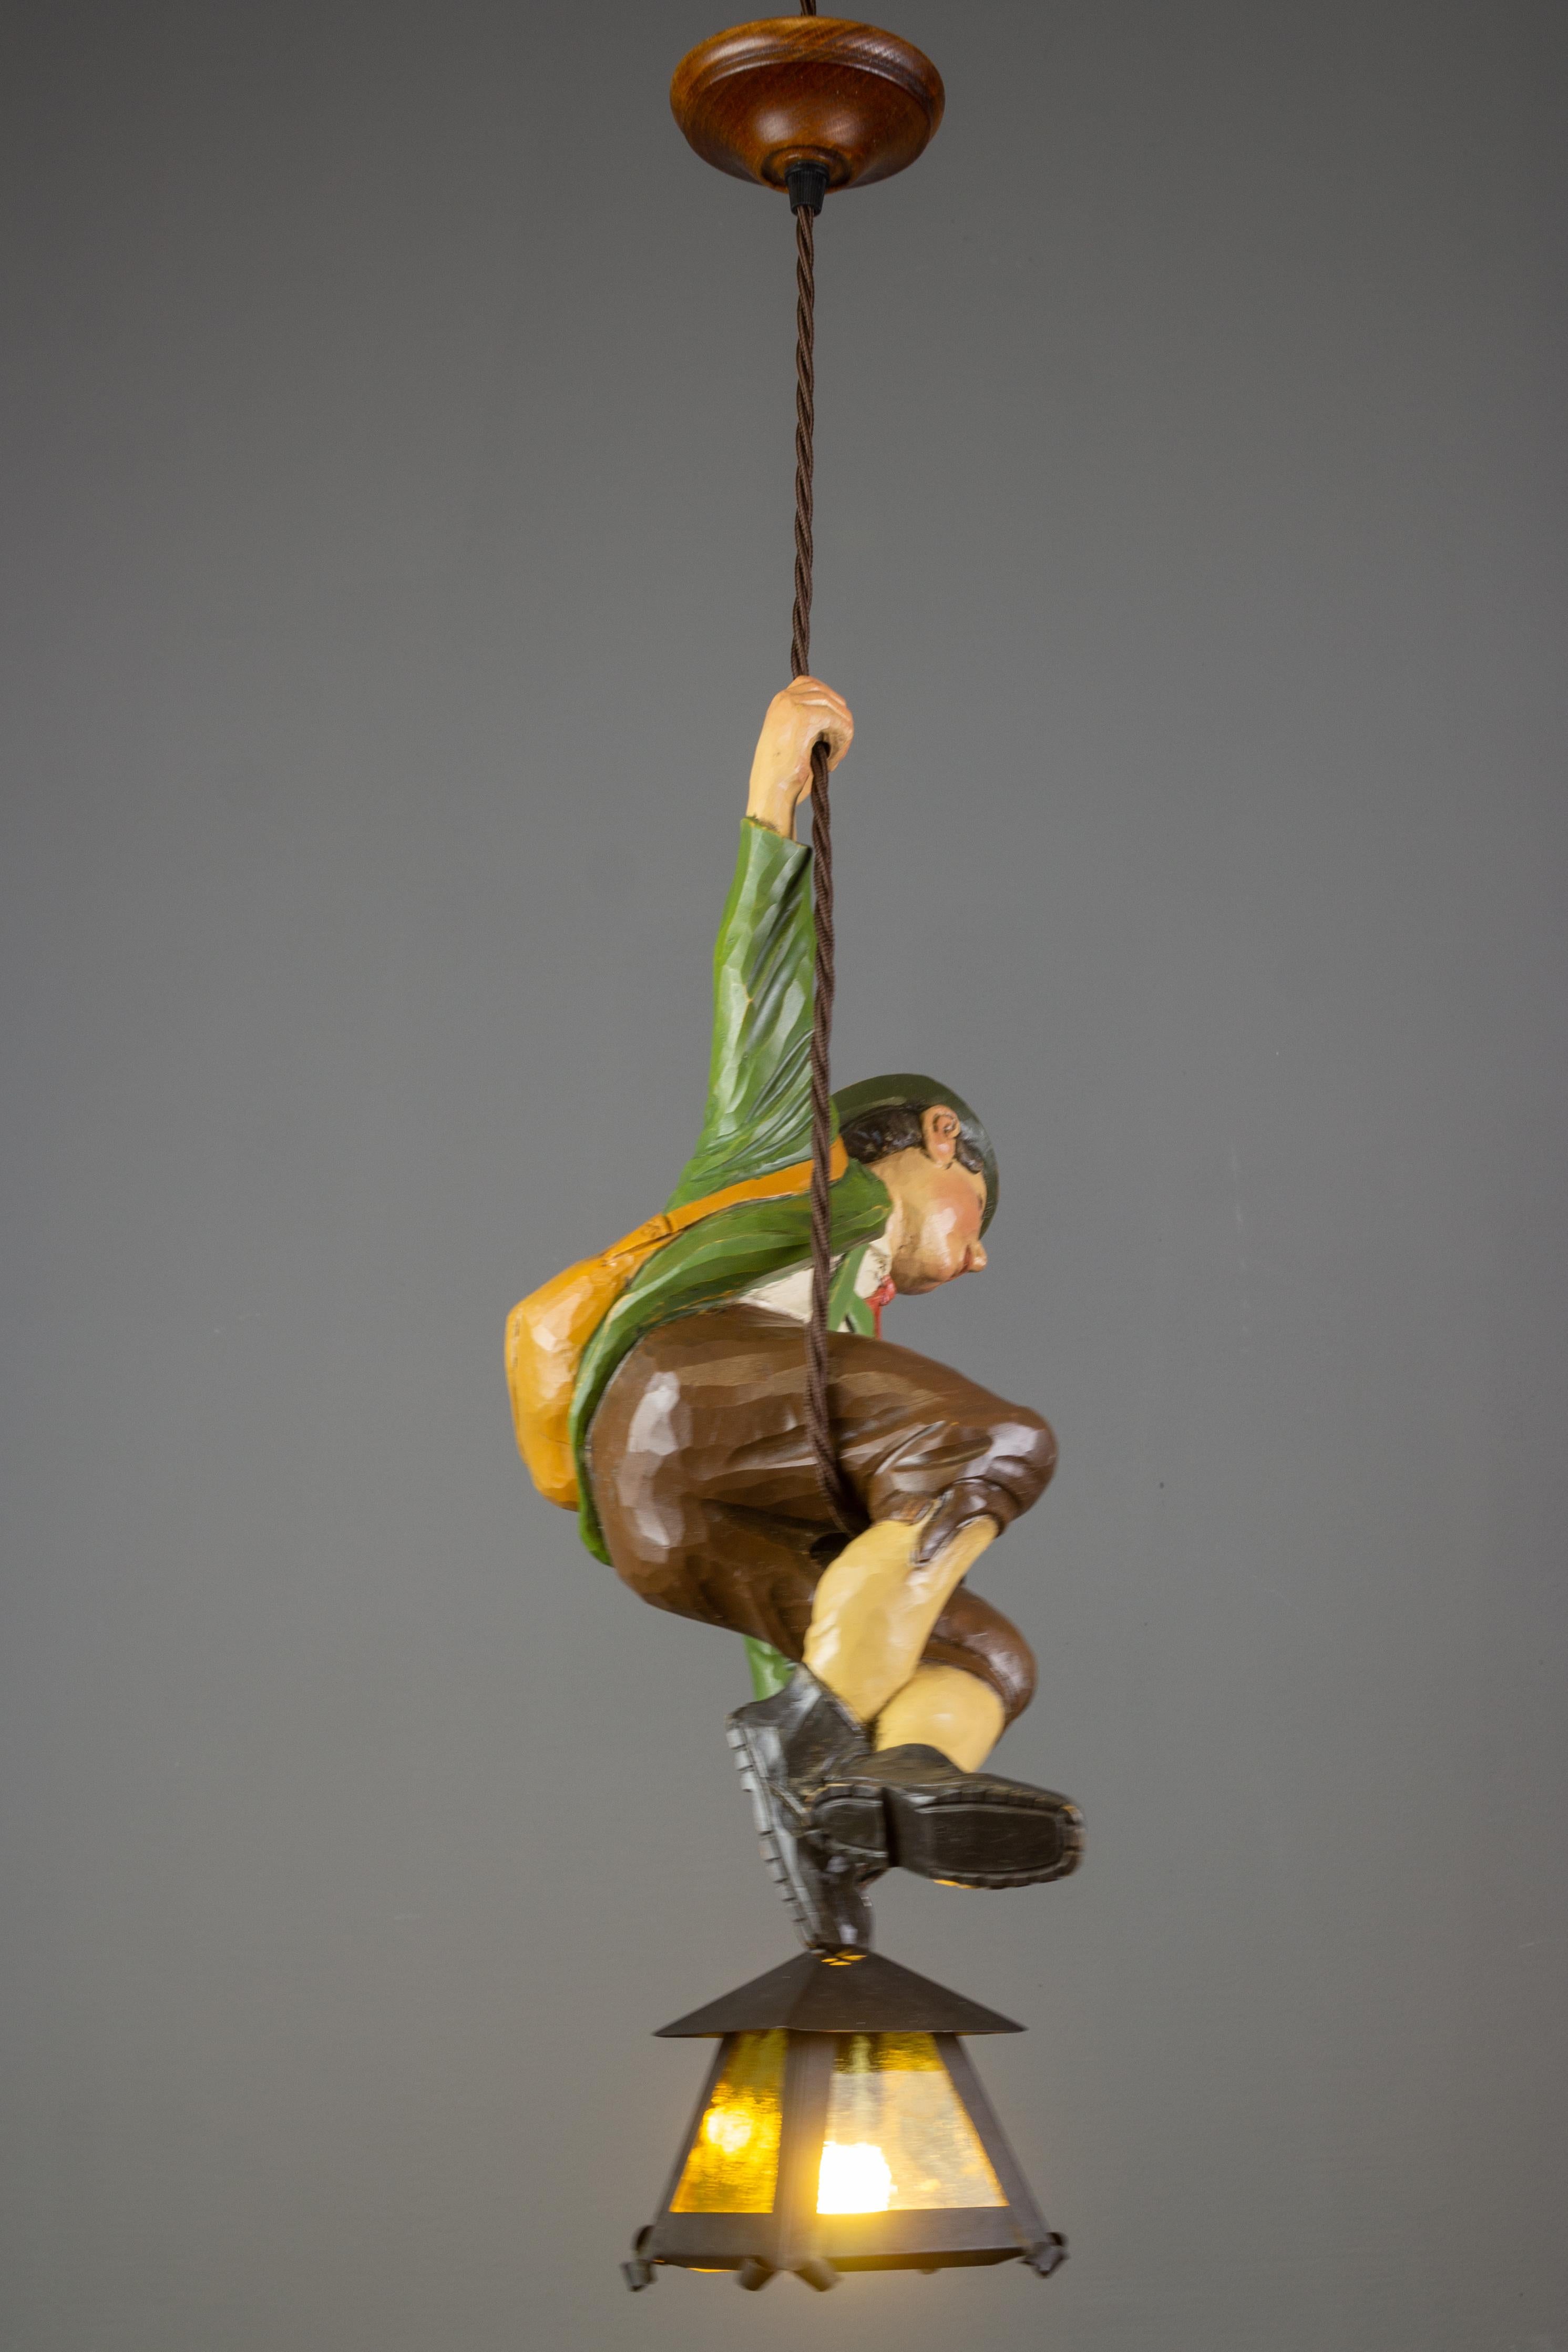 Hand-Carved German Pendant Light with Hand Carved Mountain Climber Sculpture and Lantern